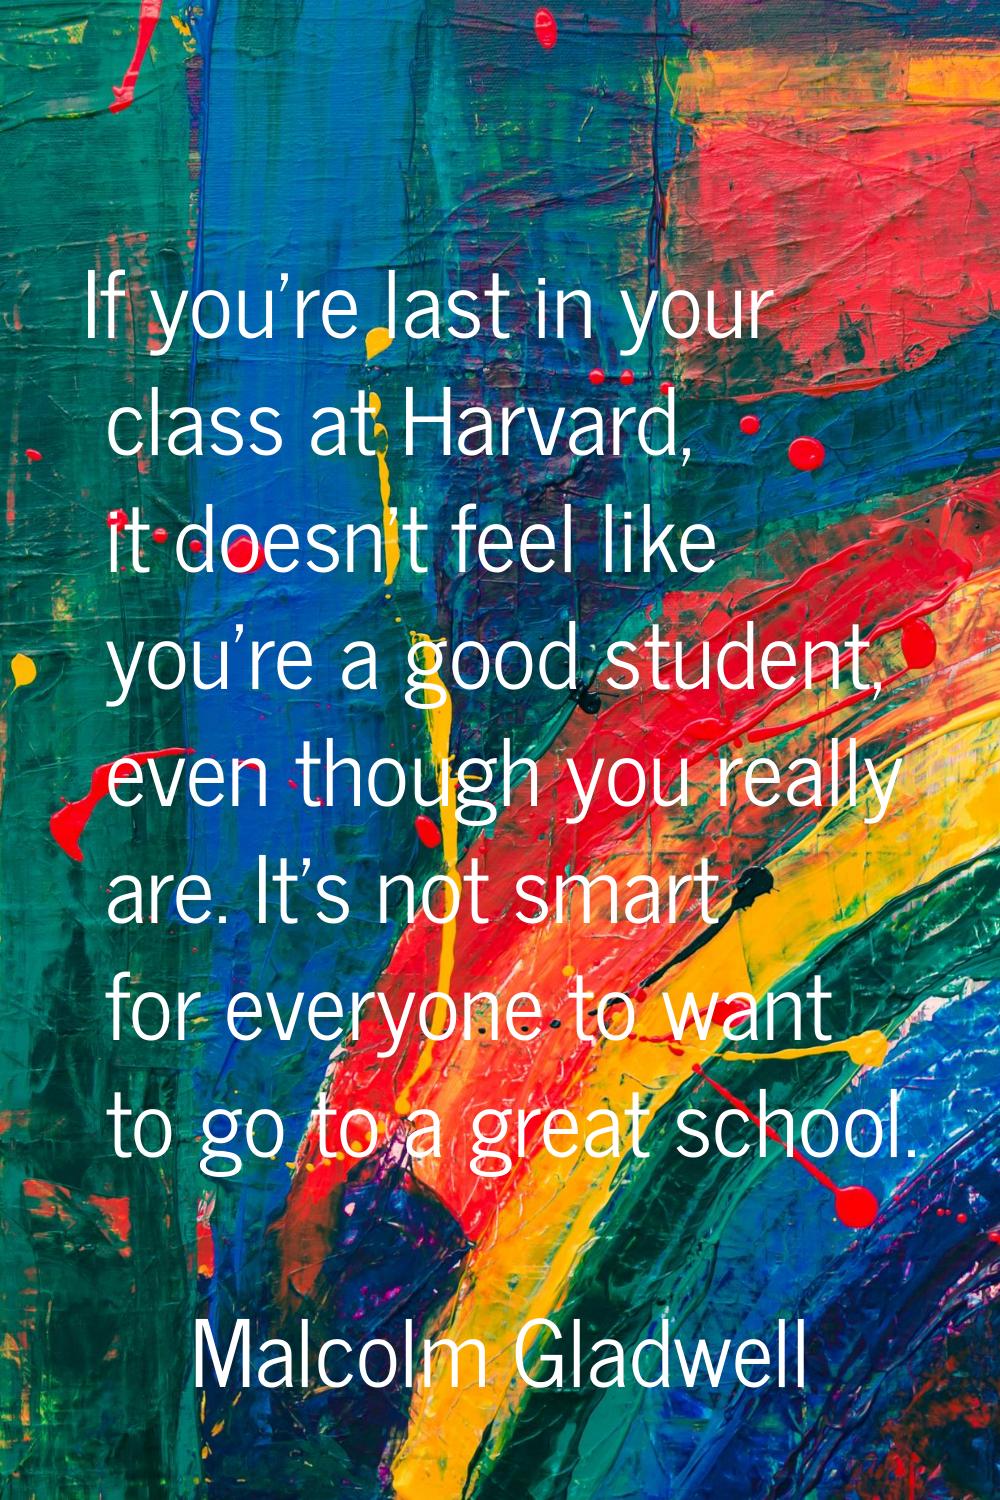 If you're last in your class at Harvard, it doesn't feel like you're a good student, even though yo